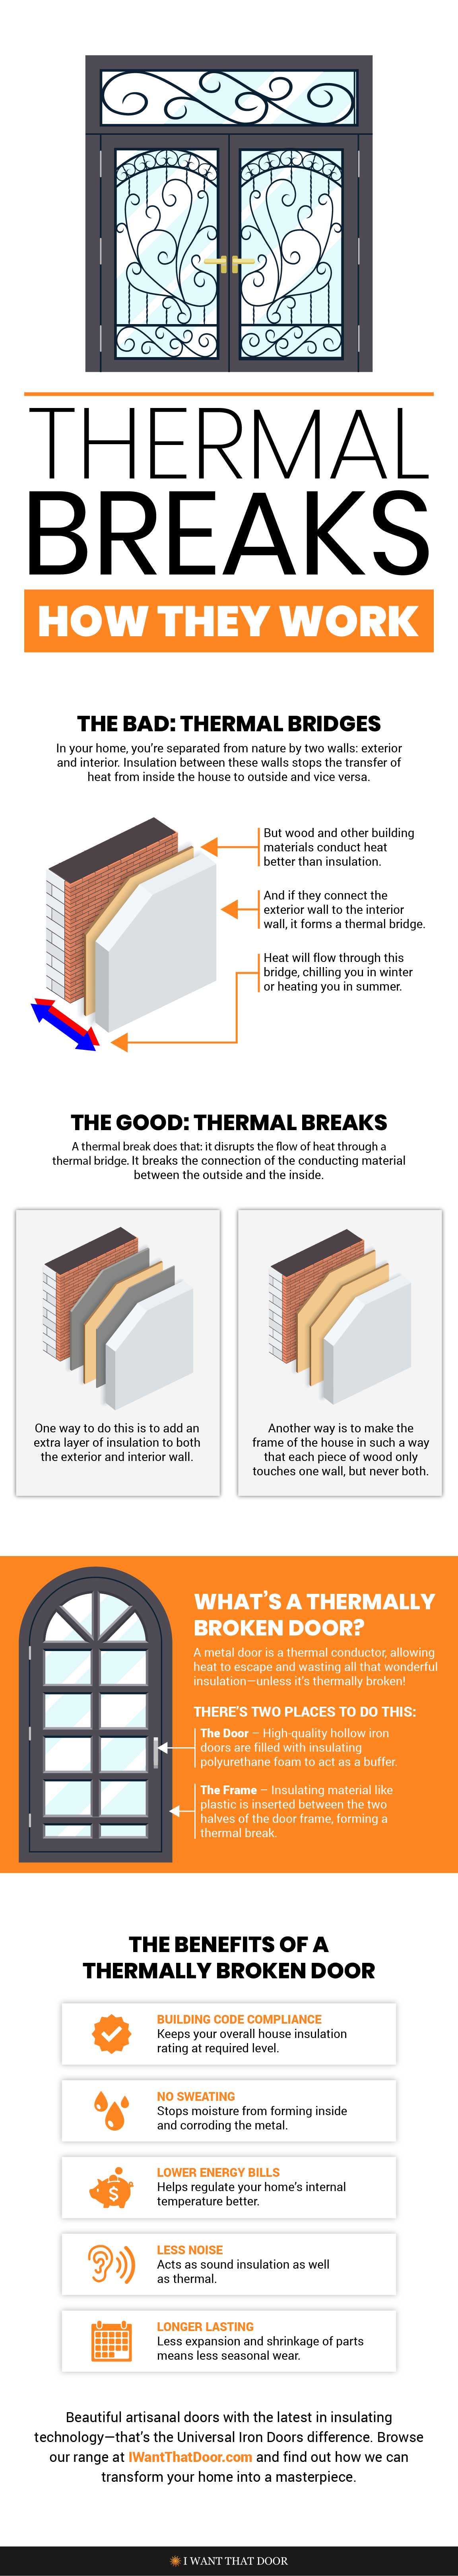 Thermal Breaks Infographic